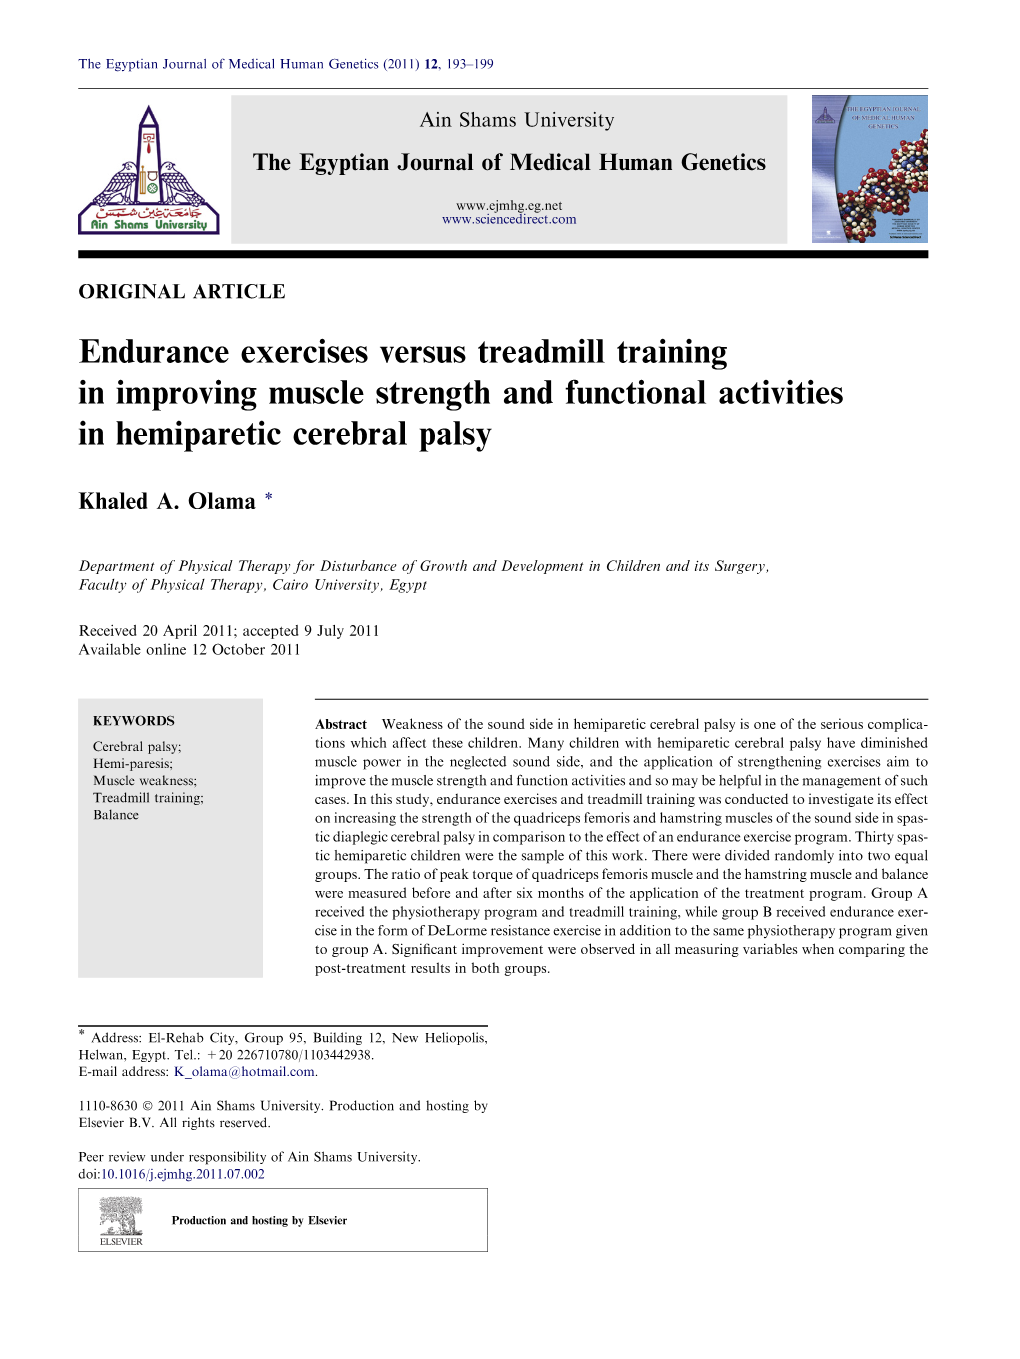 Endurance Exercises Versus Treadmill Training in Improving Muscle Strength and Functional Activities in Hemiparetic Cerebral Palsy